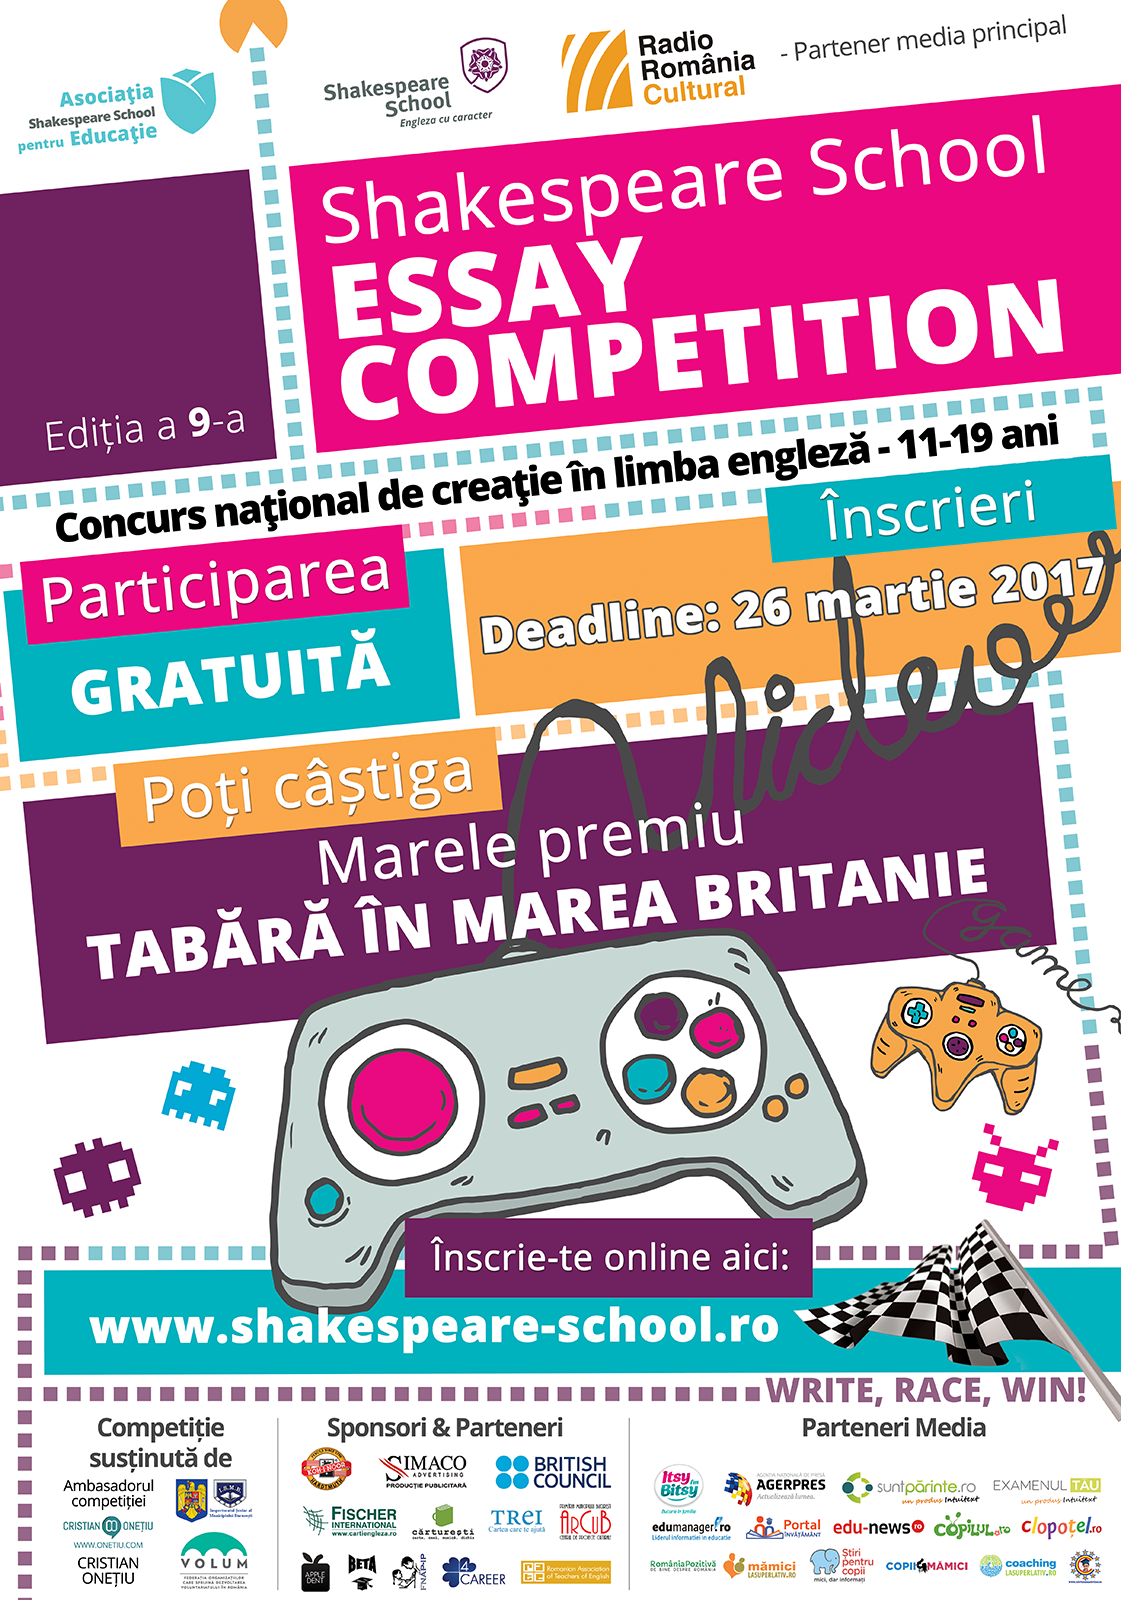 essay competition shakespeare school